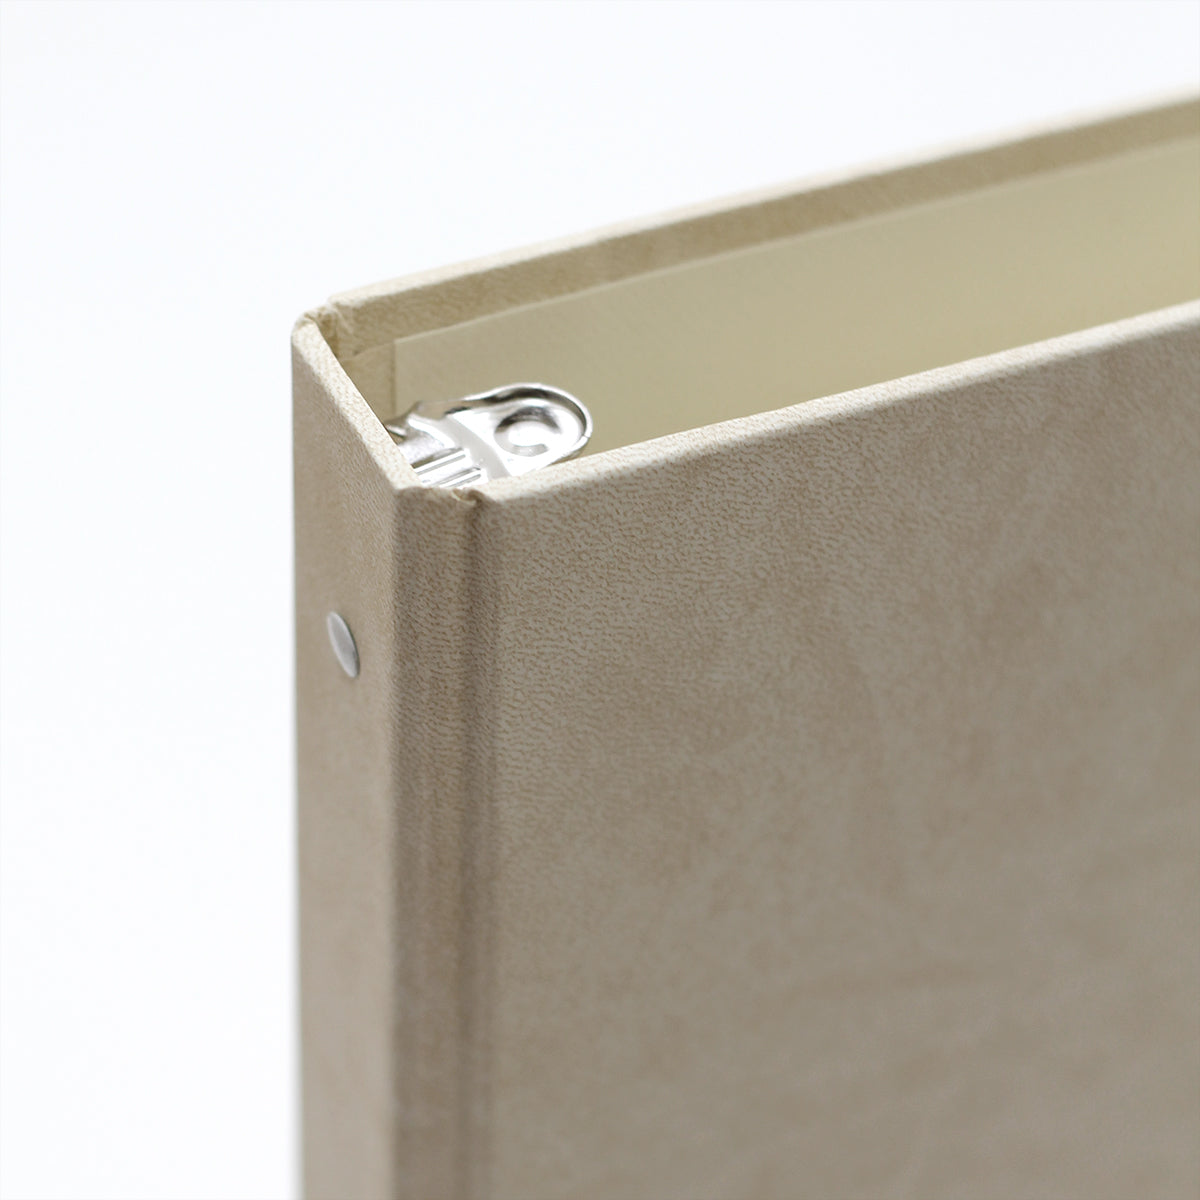 Photo Binder for 5x7 photos | Cover: Creme Vegan Leather | Available Personalized